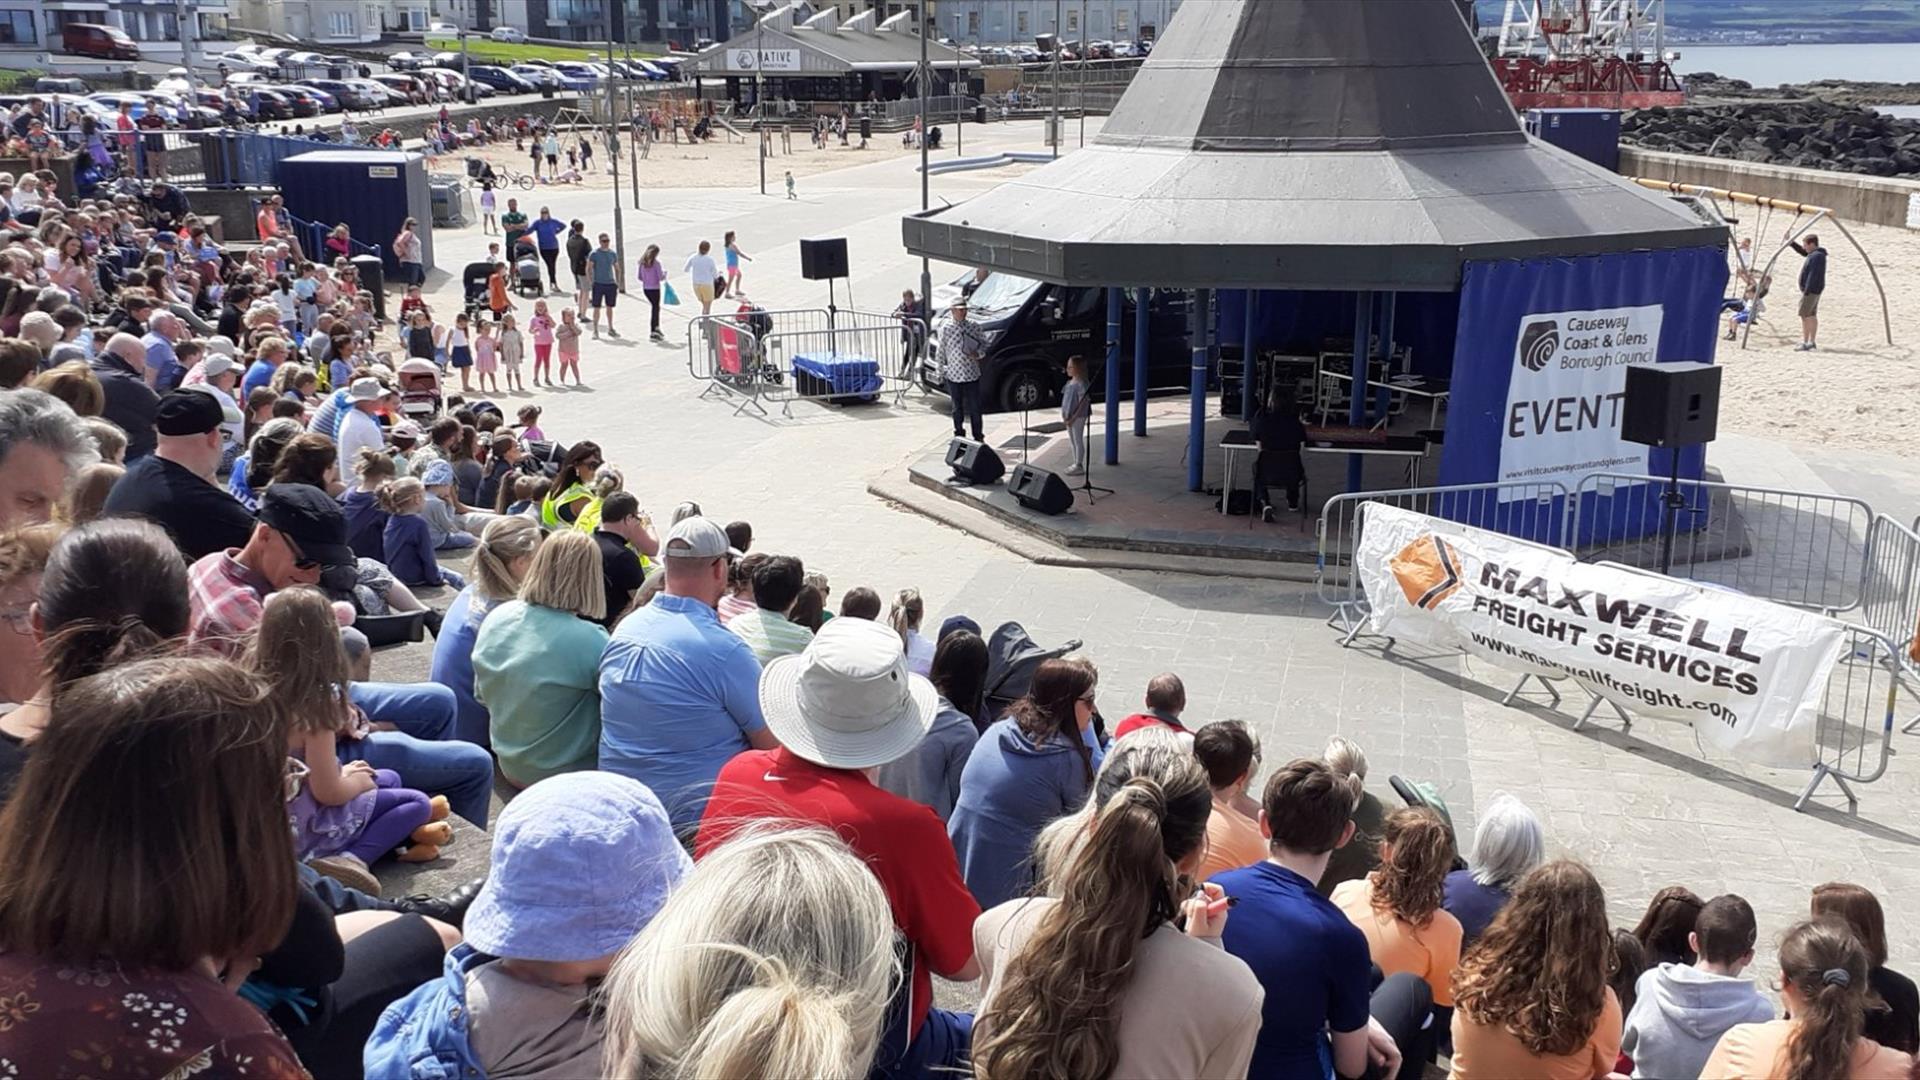 Crowds being entertained by performers at the bandstand